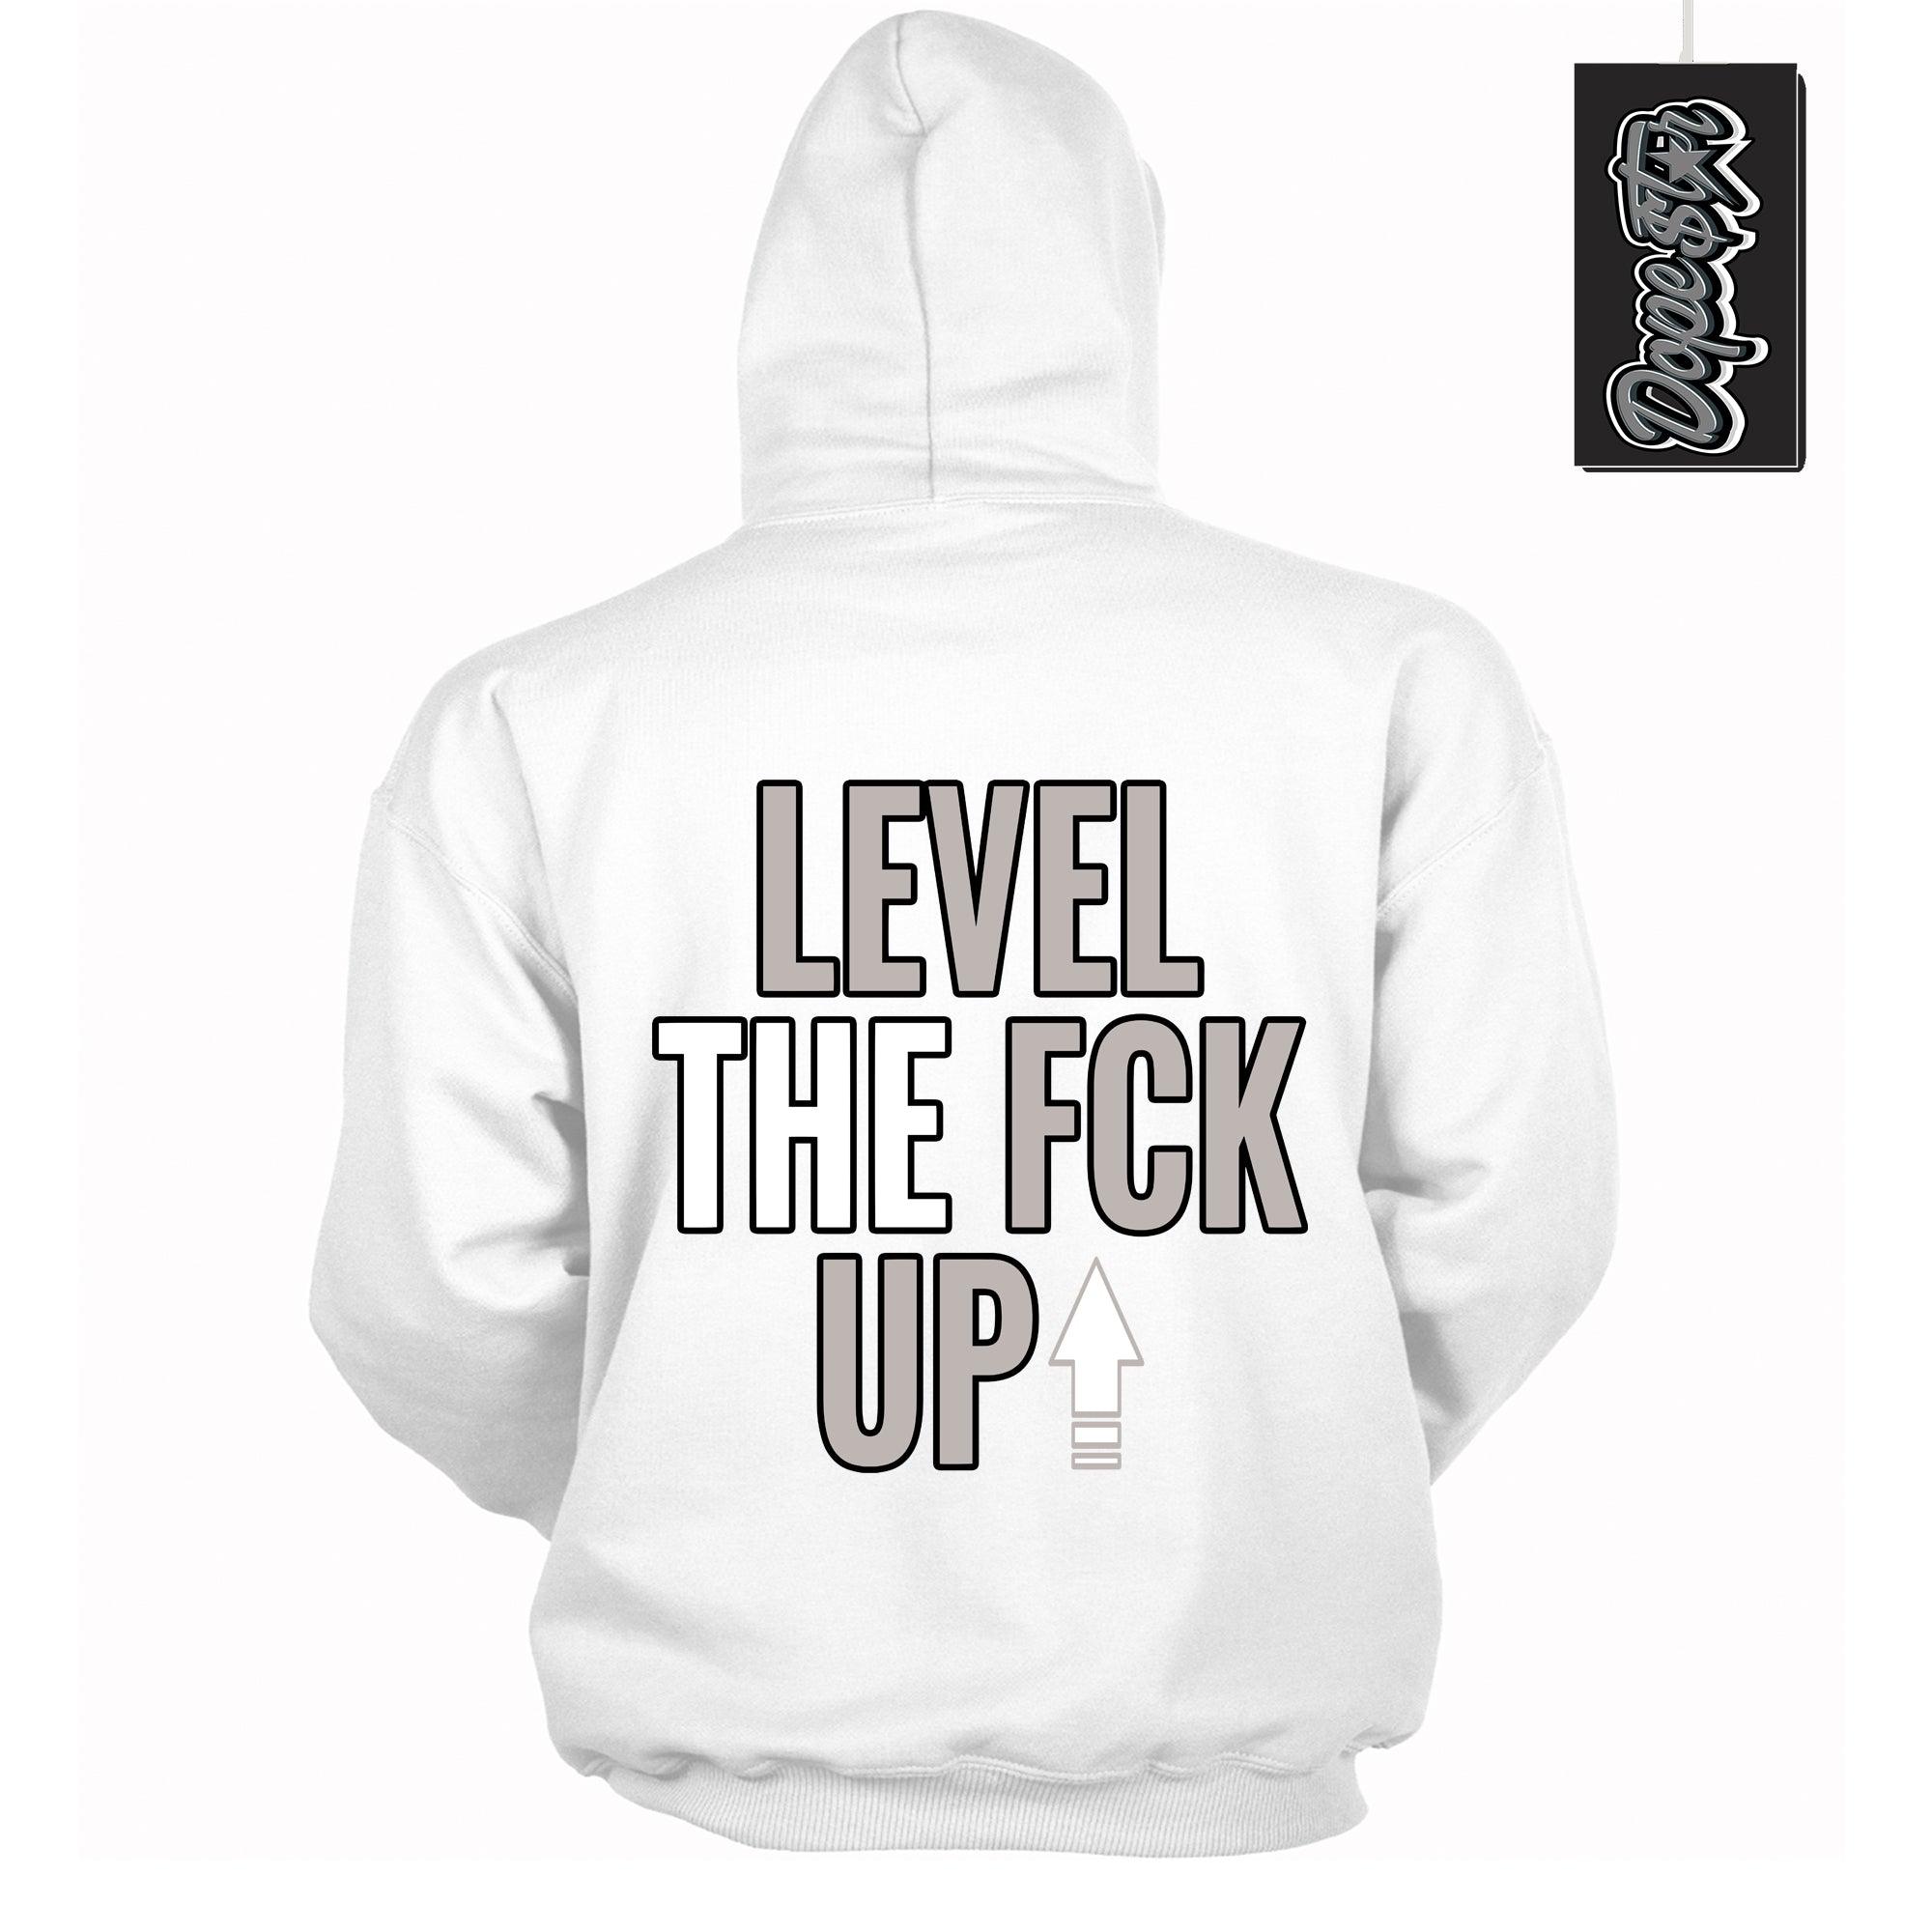 Cool White Hoodie With Level Up design That Perfectly Matches AIR JORDAN 4 RETRO MILITARY BLACK Sneakers.